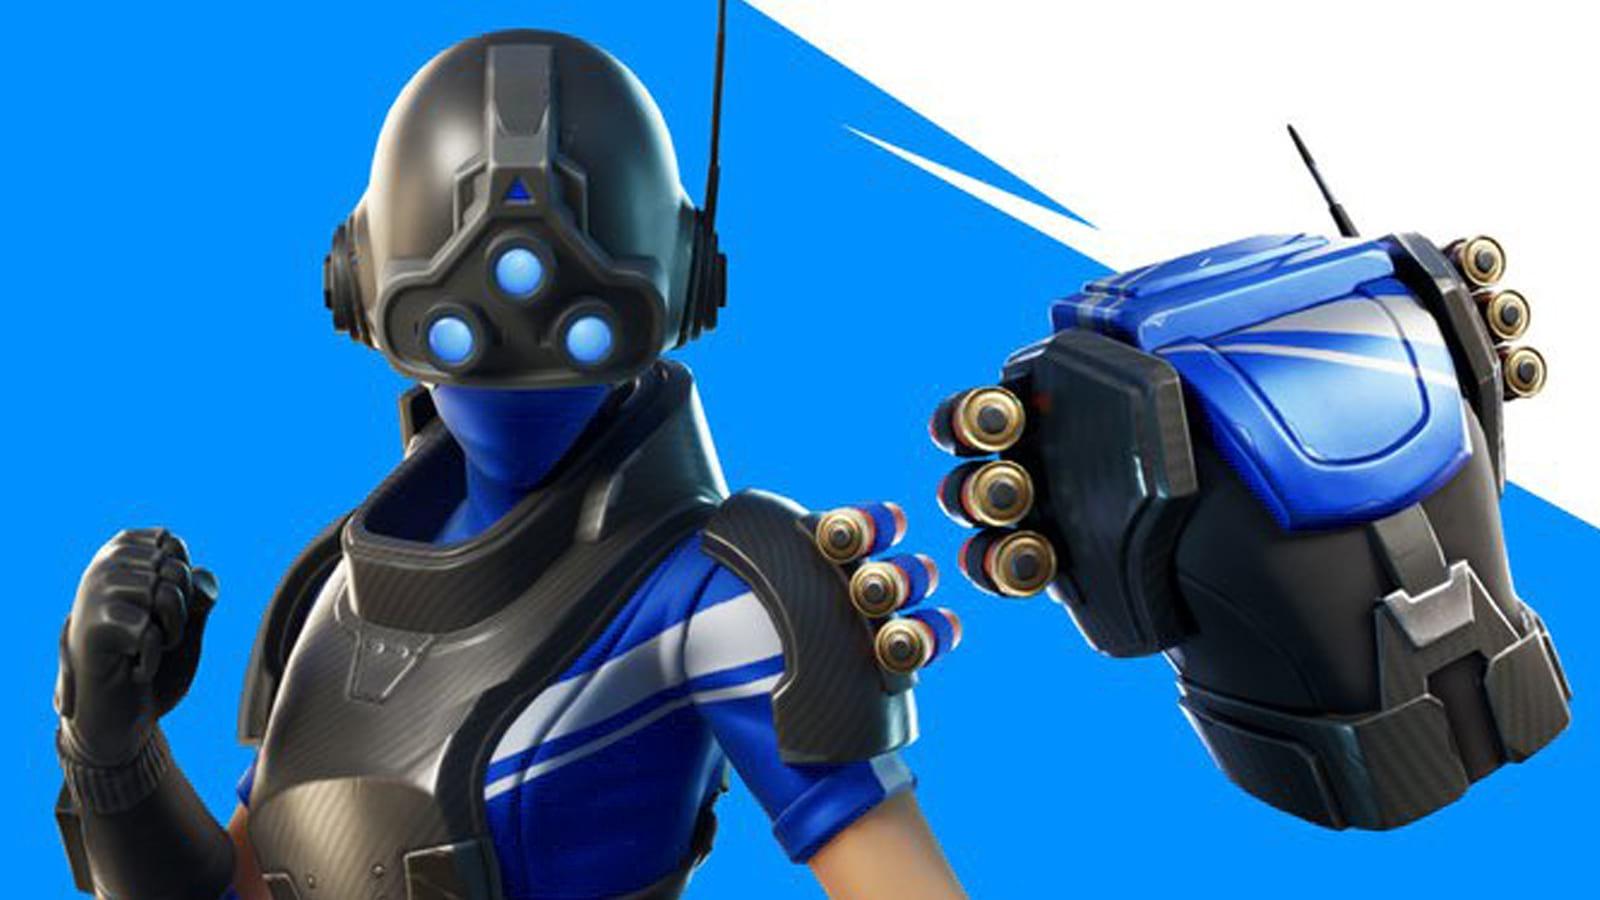 How to get the PlayStation Plus pack for free in Fortnite (2023)